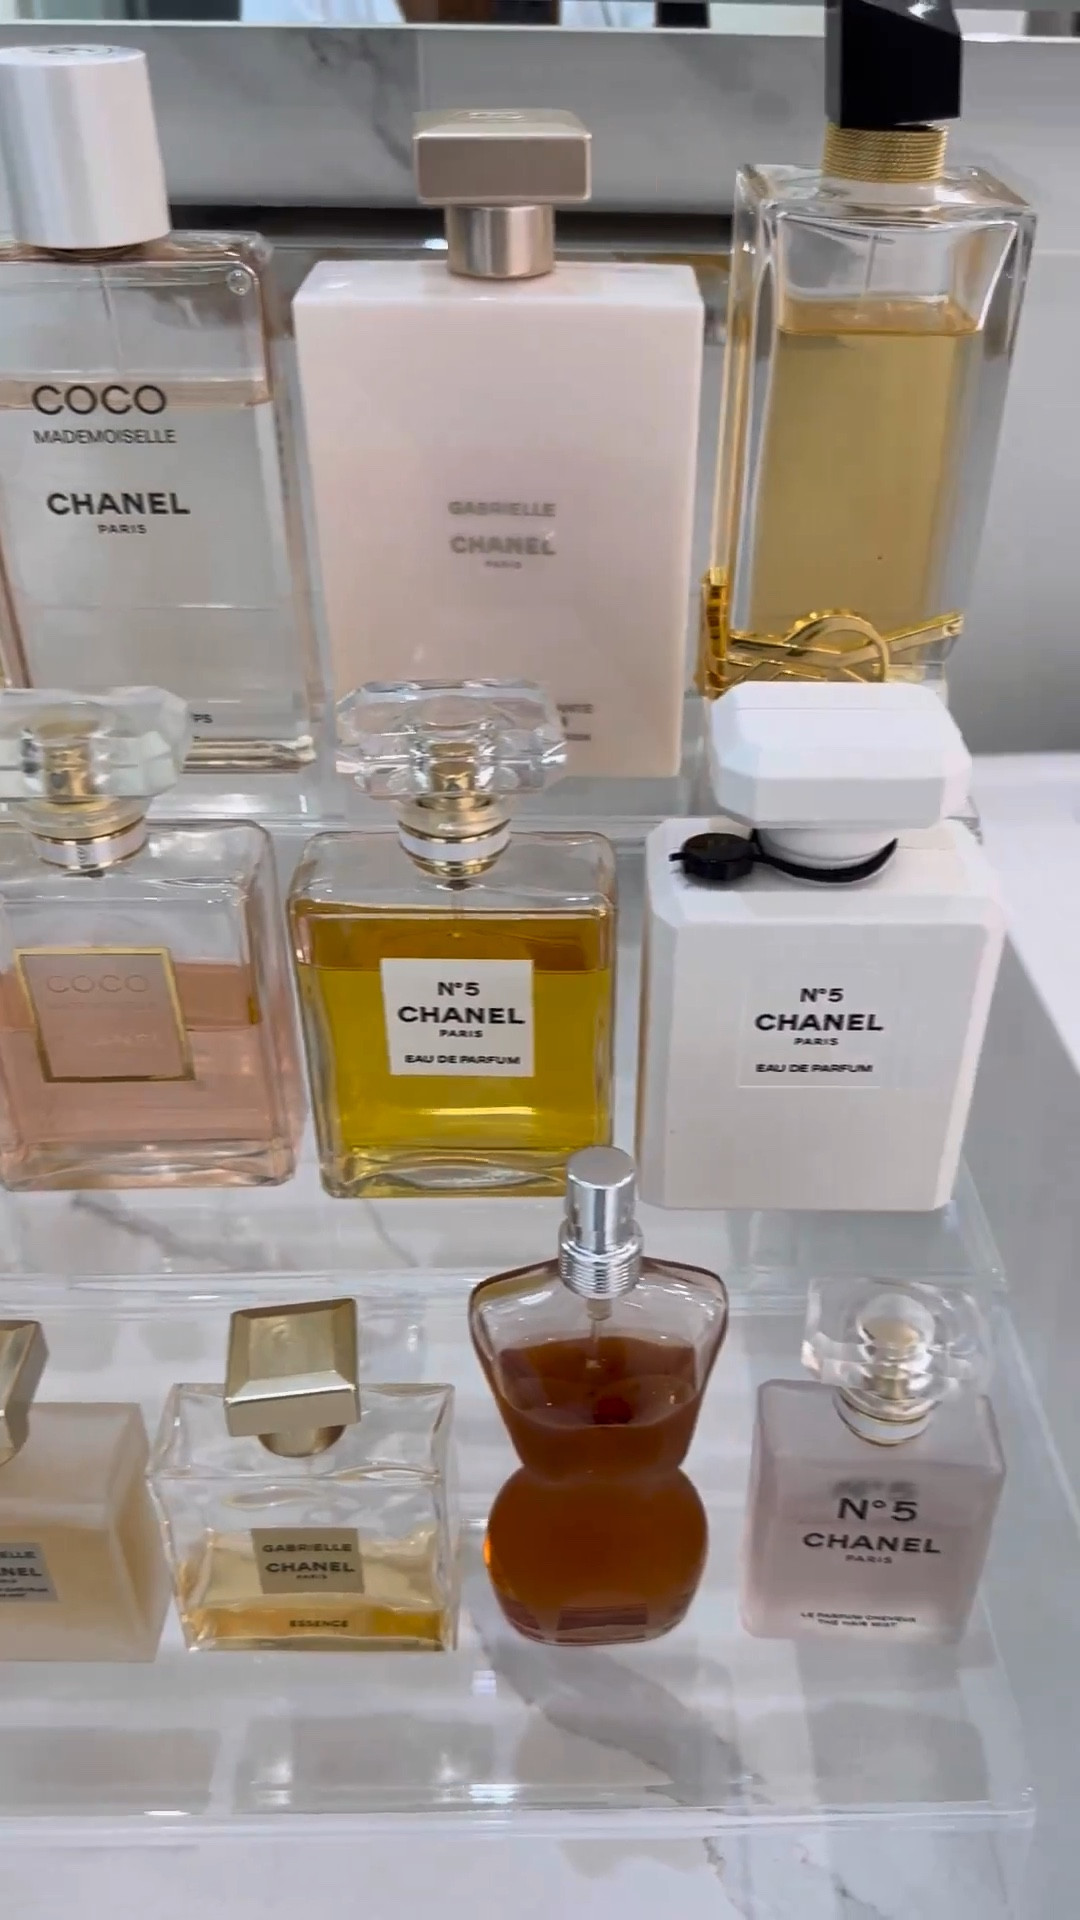 Chanel No. 5 Boxed Book Set curated on LTK